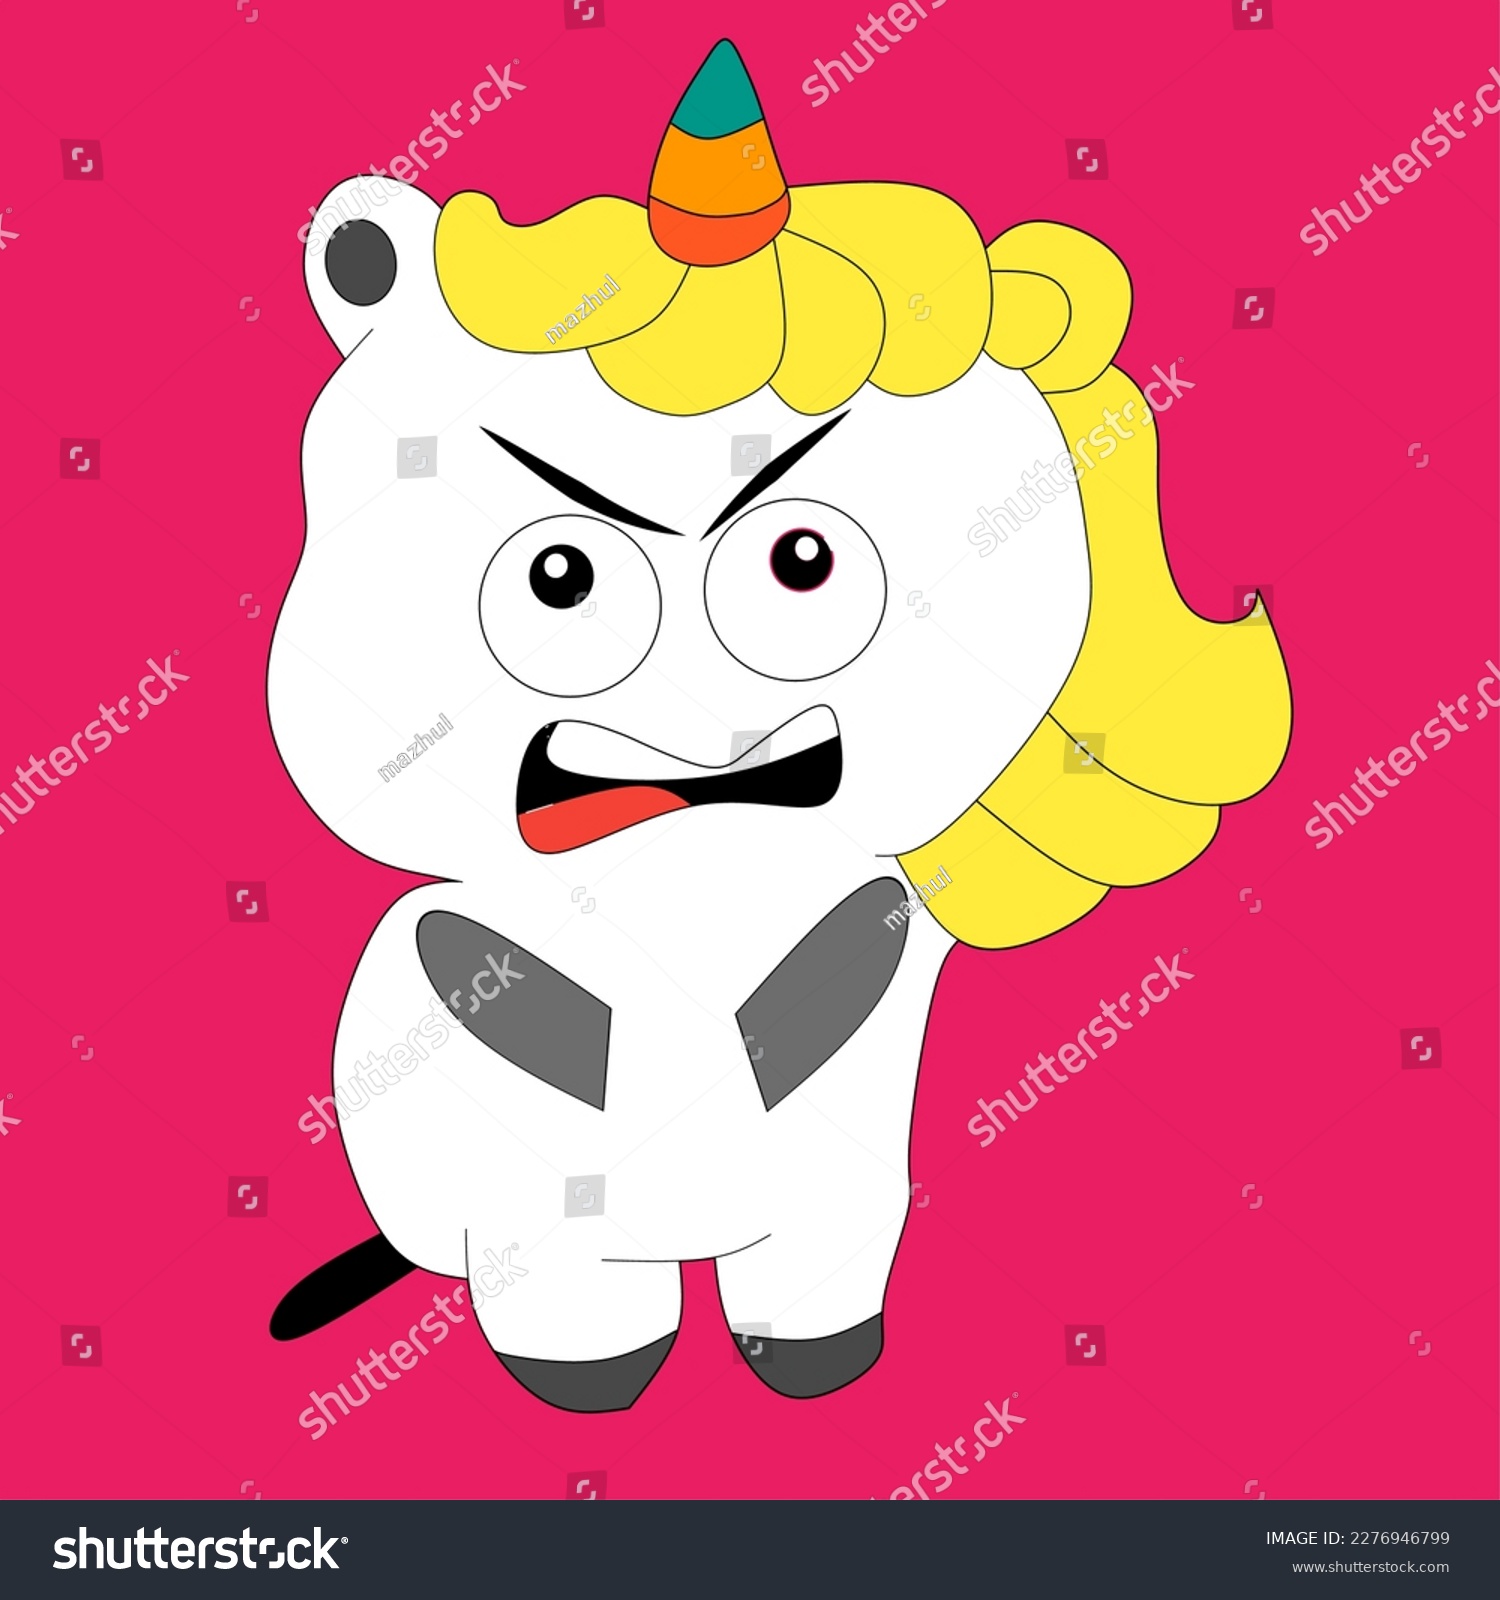 SVG of an illustration of an angry unicorn cartoon image on a bright color background svg